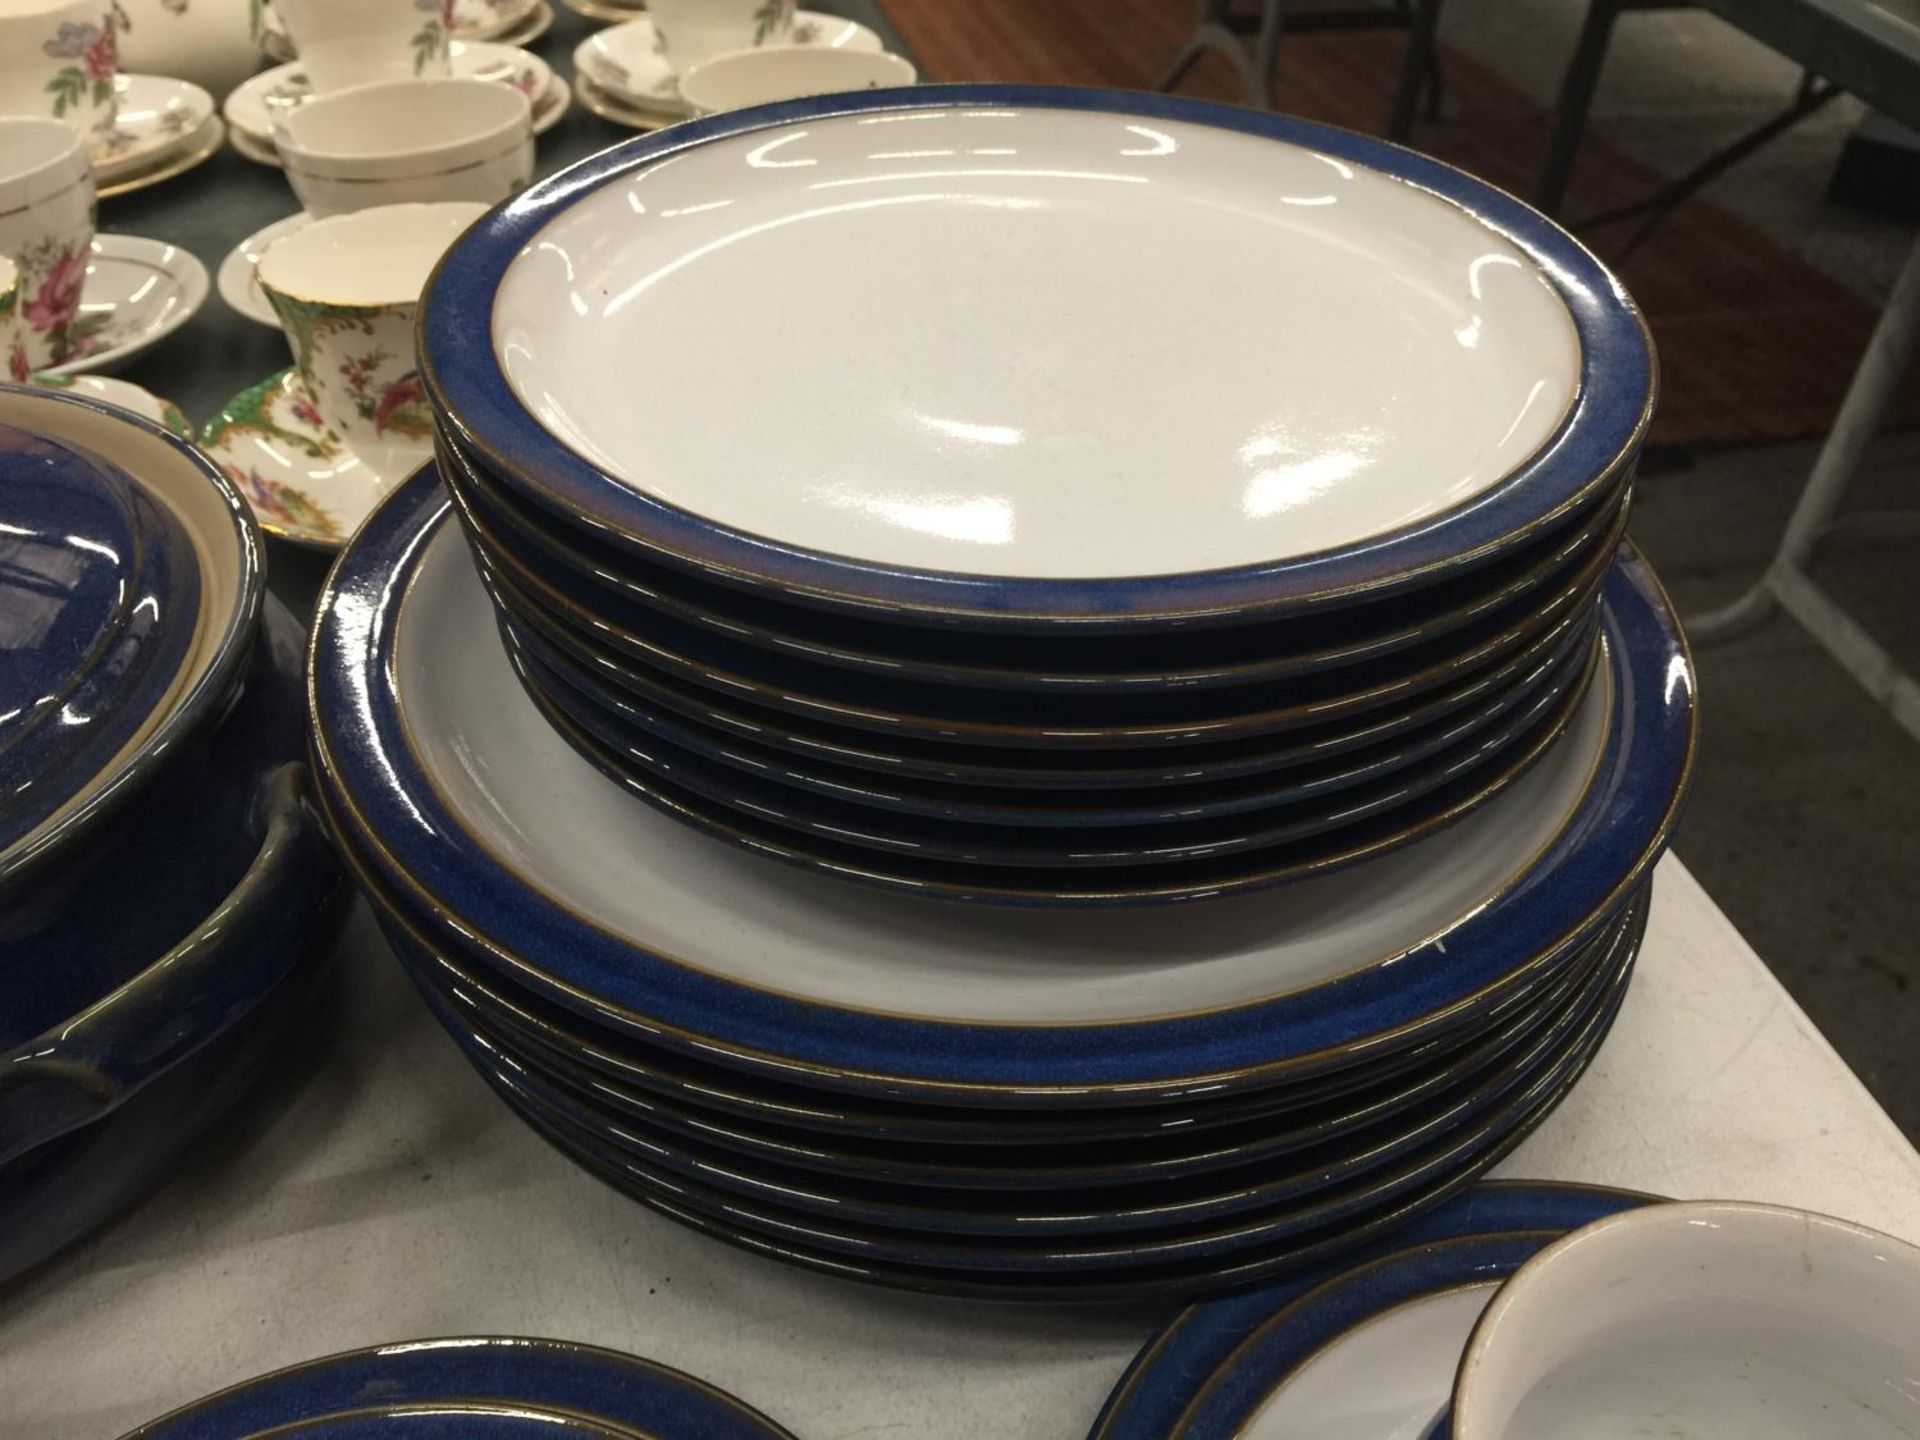 A DENBY DINNER SERVICE IN BLUE TO INCLUDE PLATES, BOWLS, TEAPOTS, SERVING TUREEN, MILK JUGS, SUGAR - Image 8 of 9